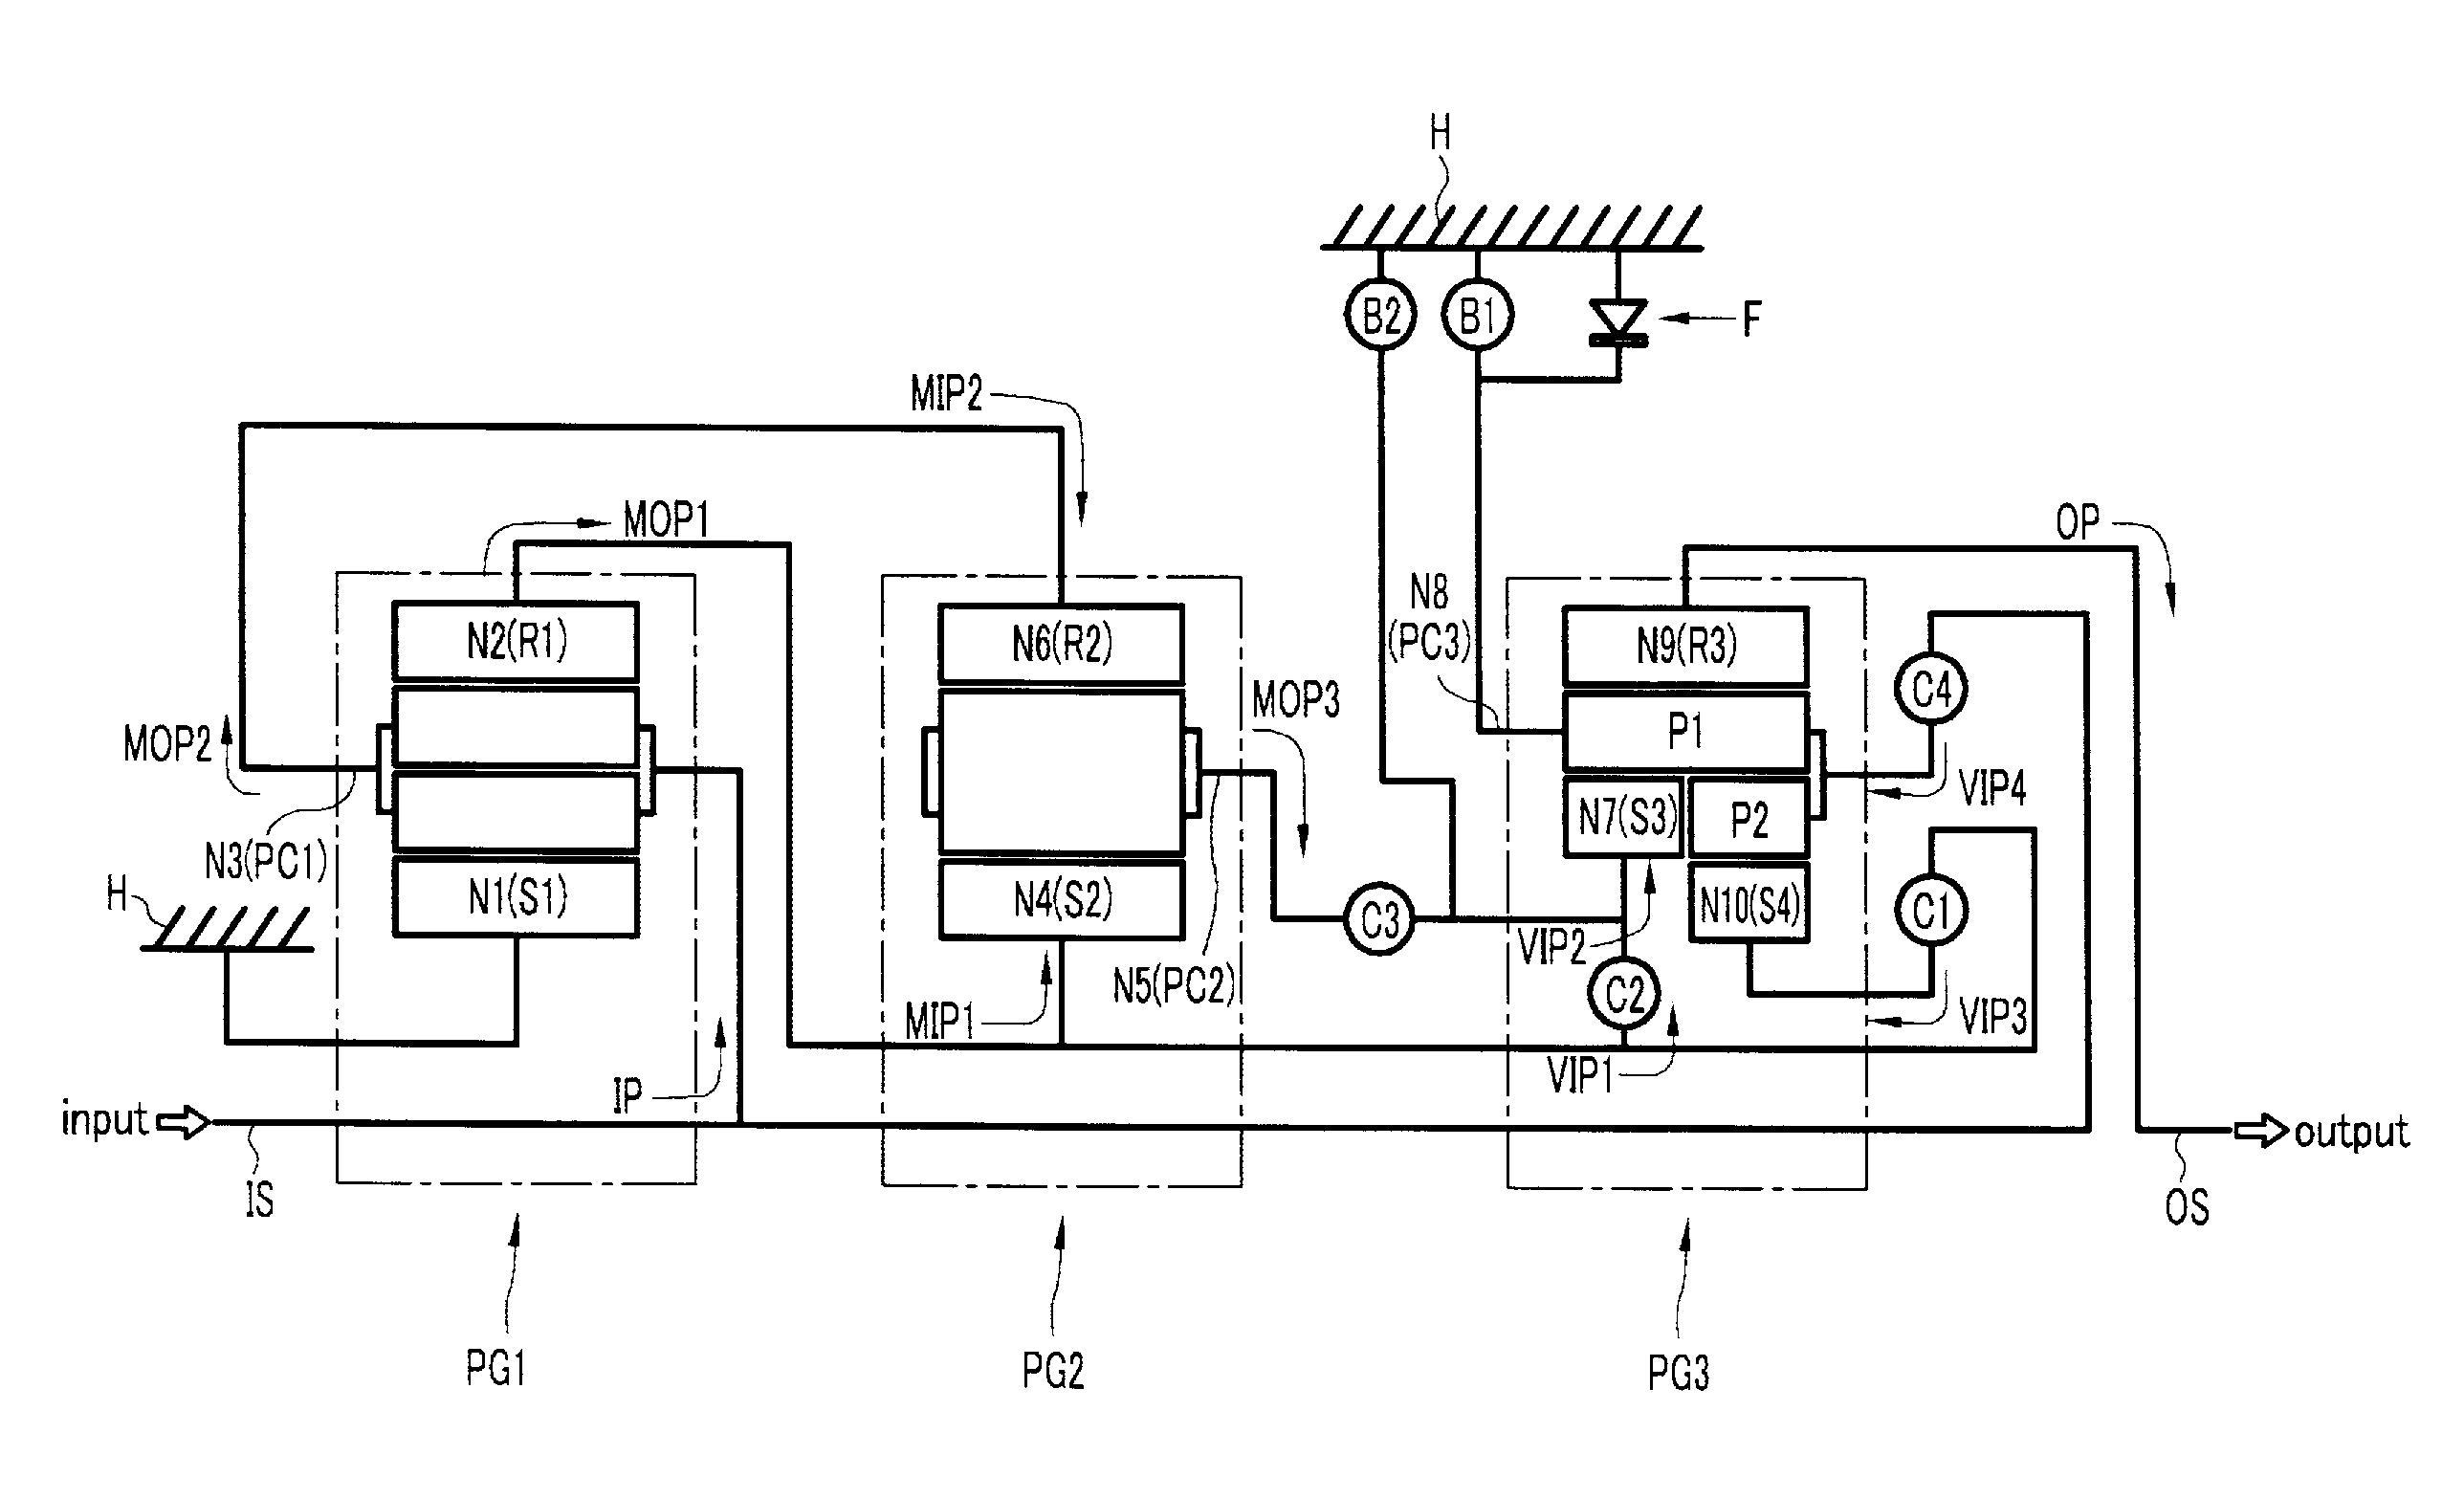 Gear train of automatic transmission for vehicle